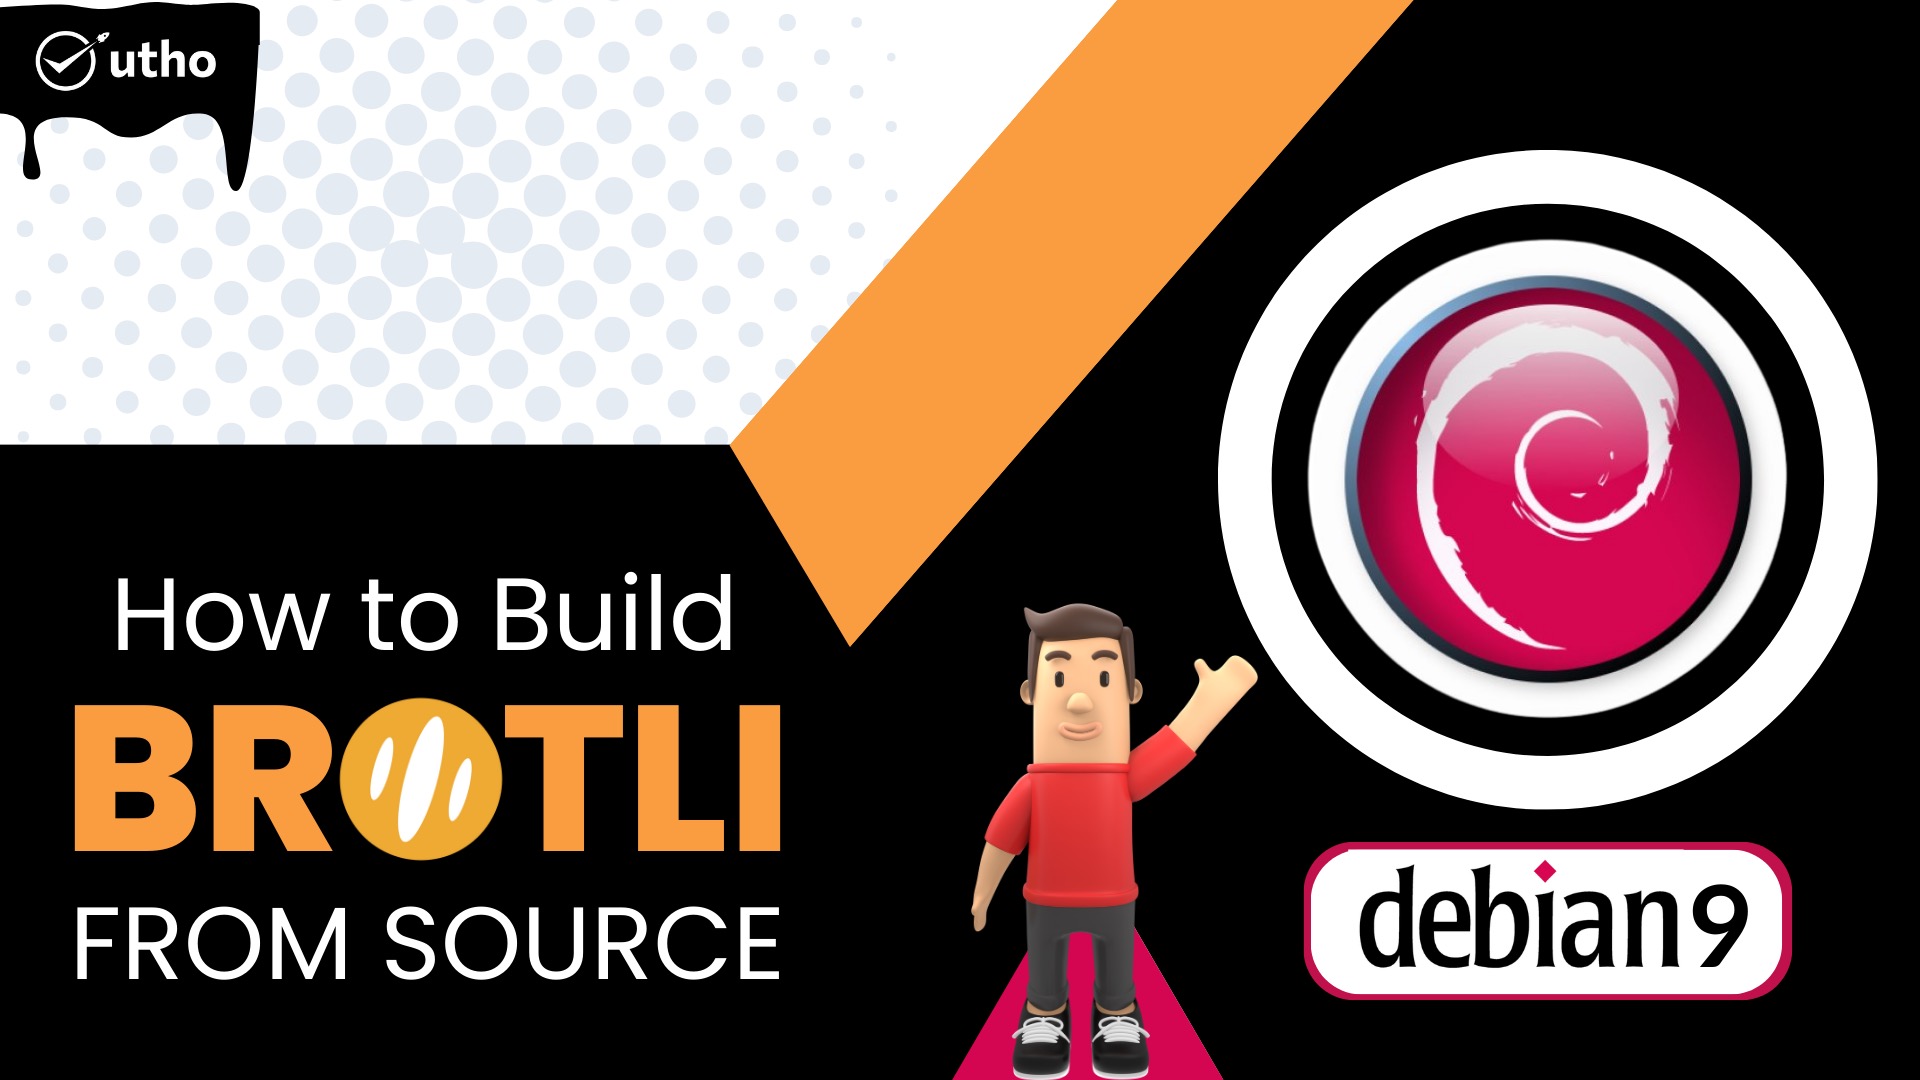 How to Build Brotli From Source on Debian 9